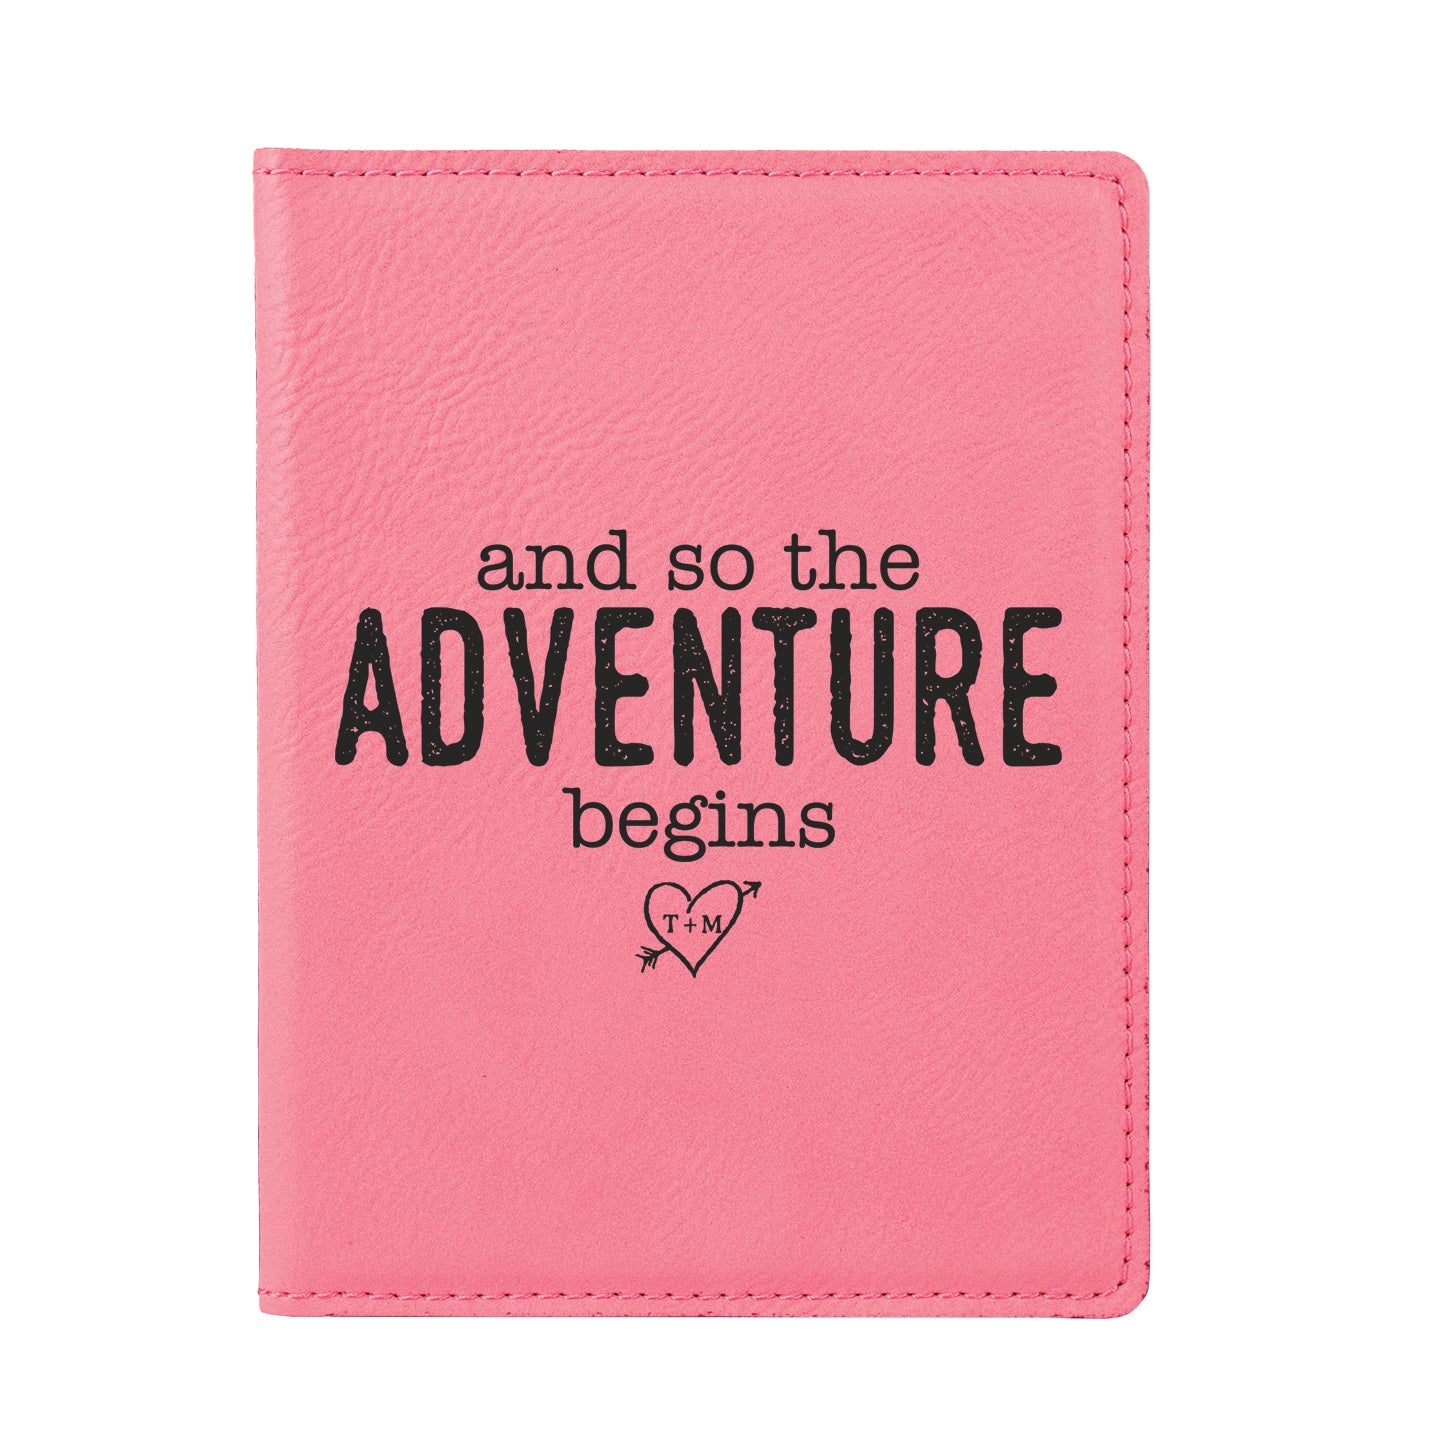 Let The Adventure Begin - Travel Personalized Passport Cover, Passport Holder - Gift for Couples, Husband Wife, Travel Lovers - 1 Set (2 Passport